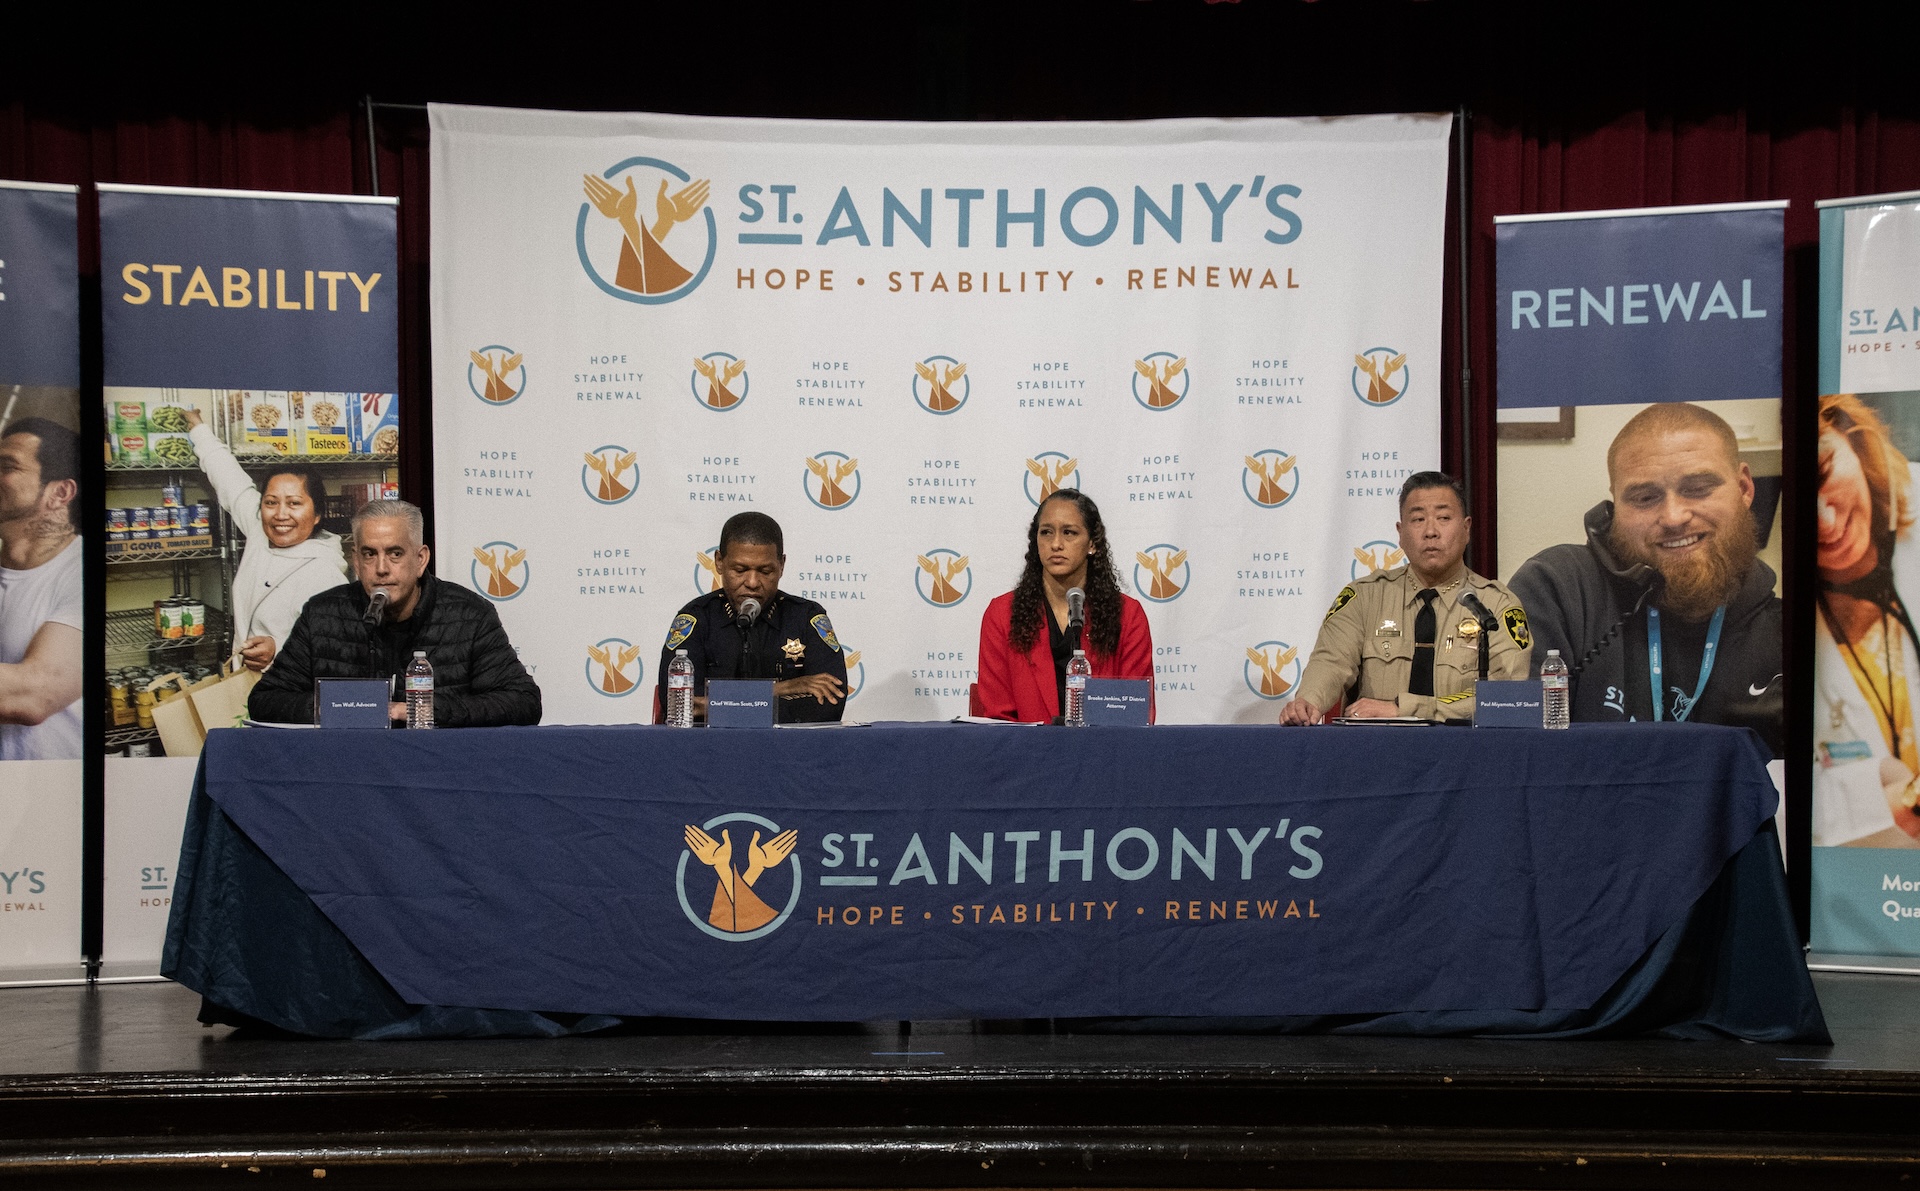 Public Safety Town Hall Inspires Optimism and Hope for the Future as Community Comes Together to Discuss Neighborhood Crime